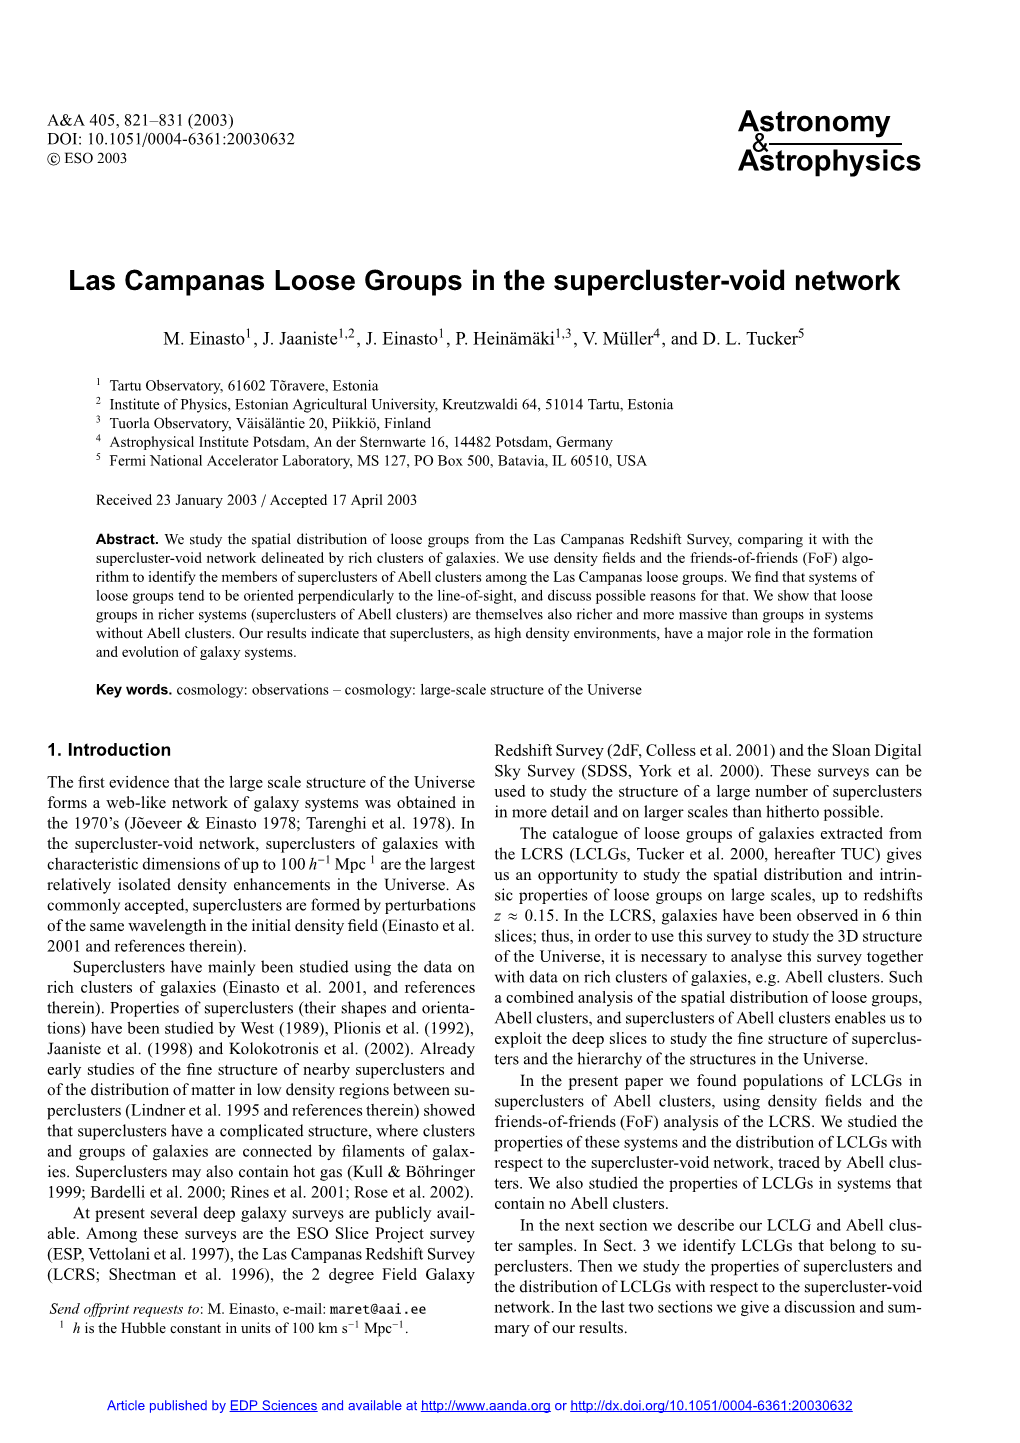 Las Campanas Loose Groups in the Supercluster-Void Network